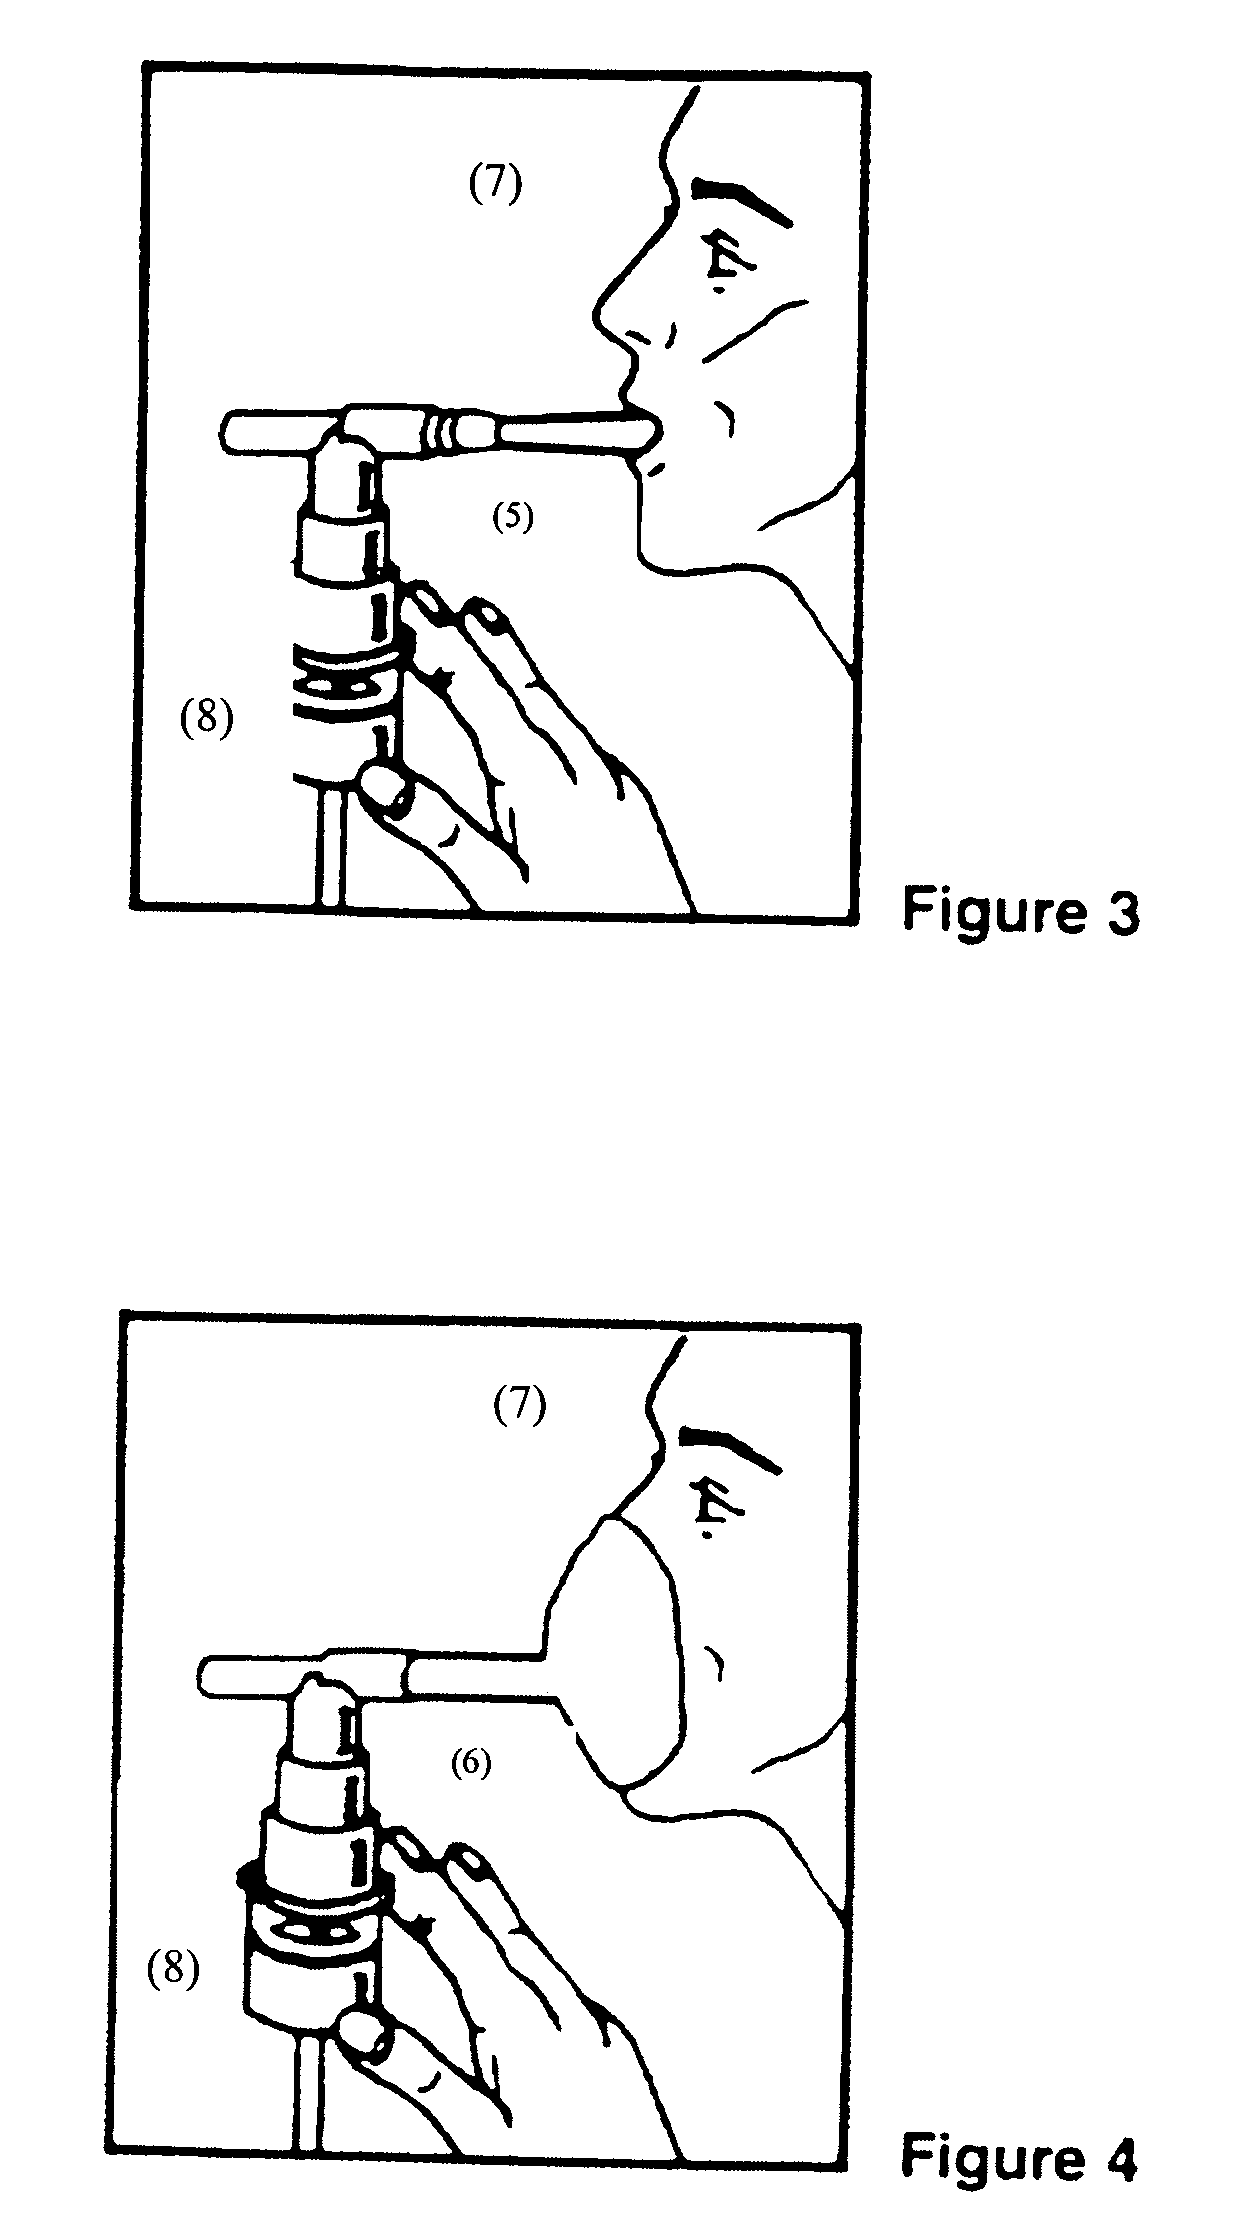 Albuterol inhalation solution, system, kit and method for relieving symptoms of pediatric asthma